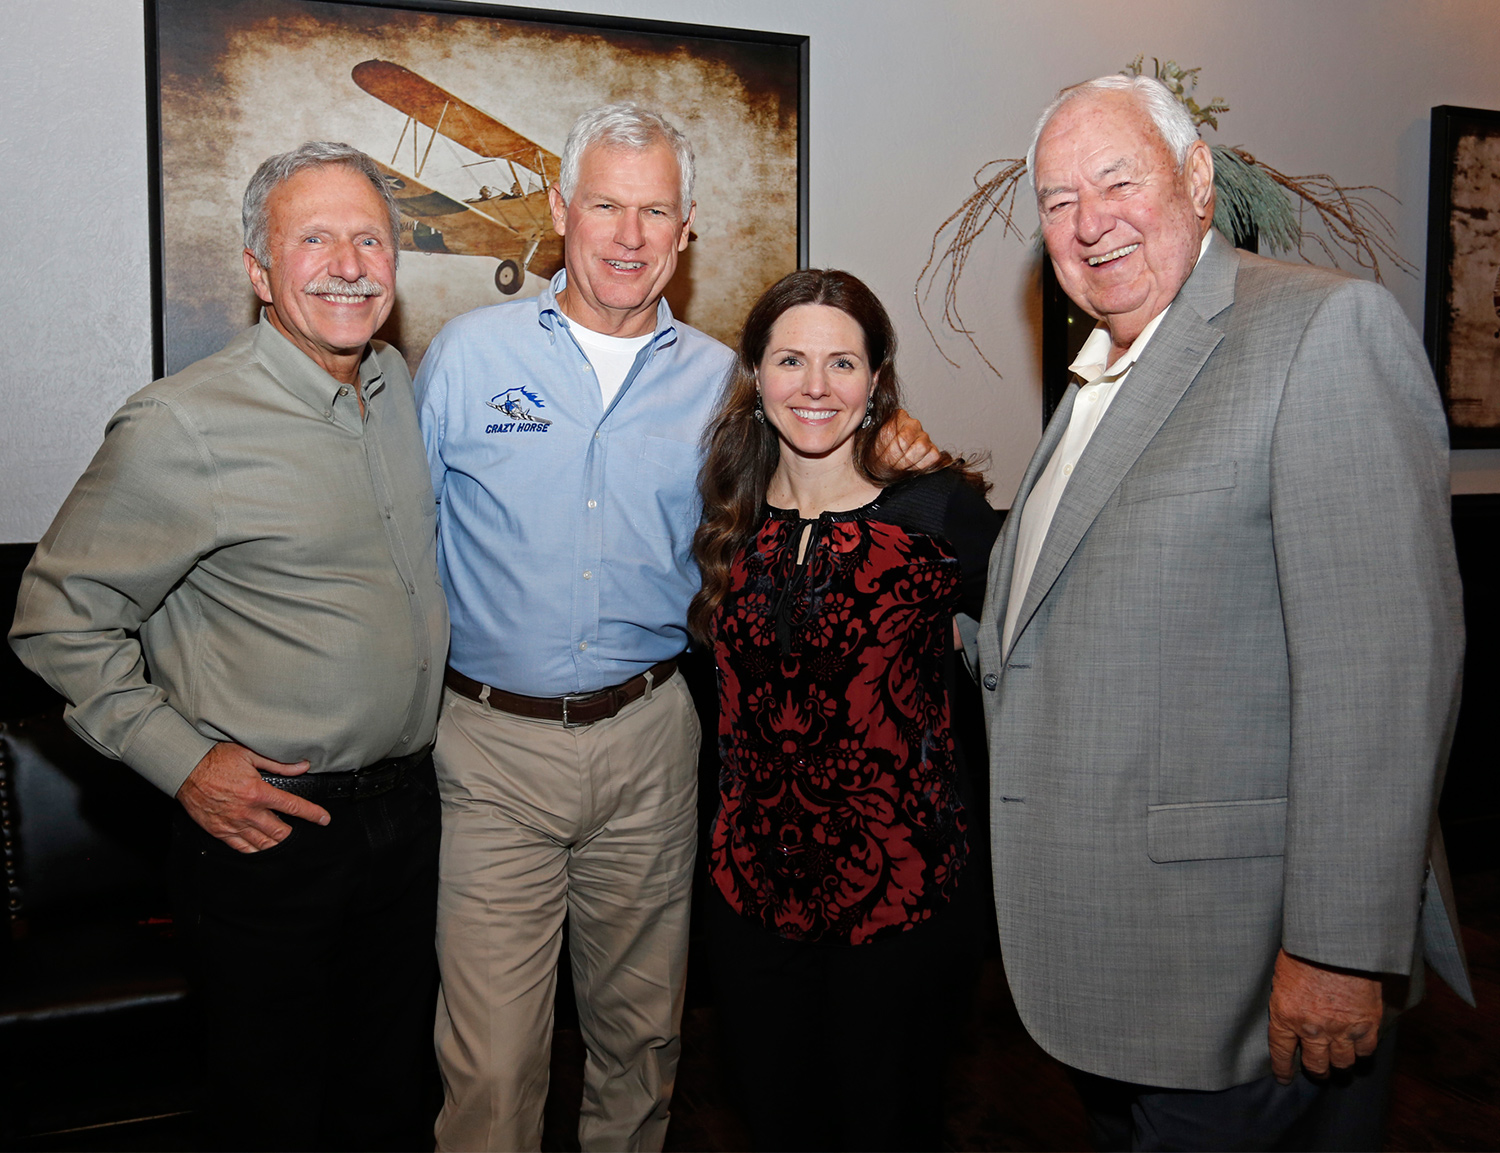 Ashely Bowen Cook with aviation greats